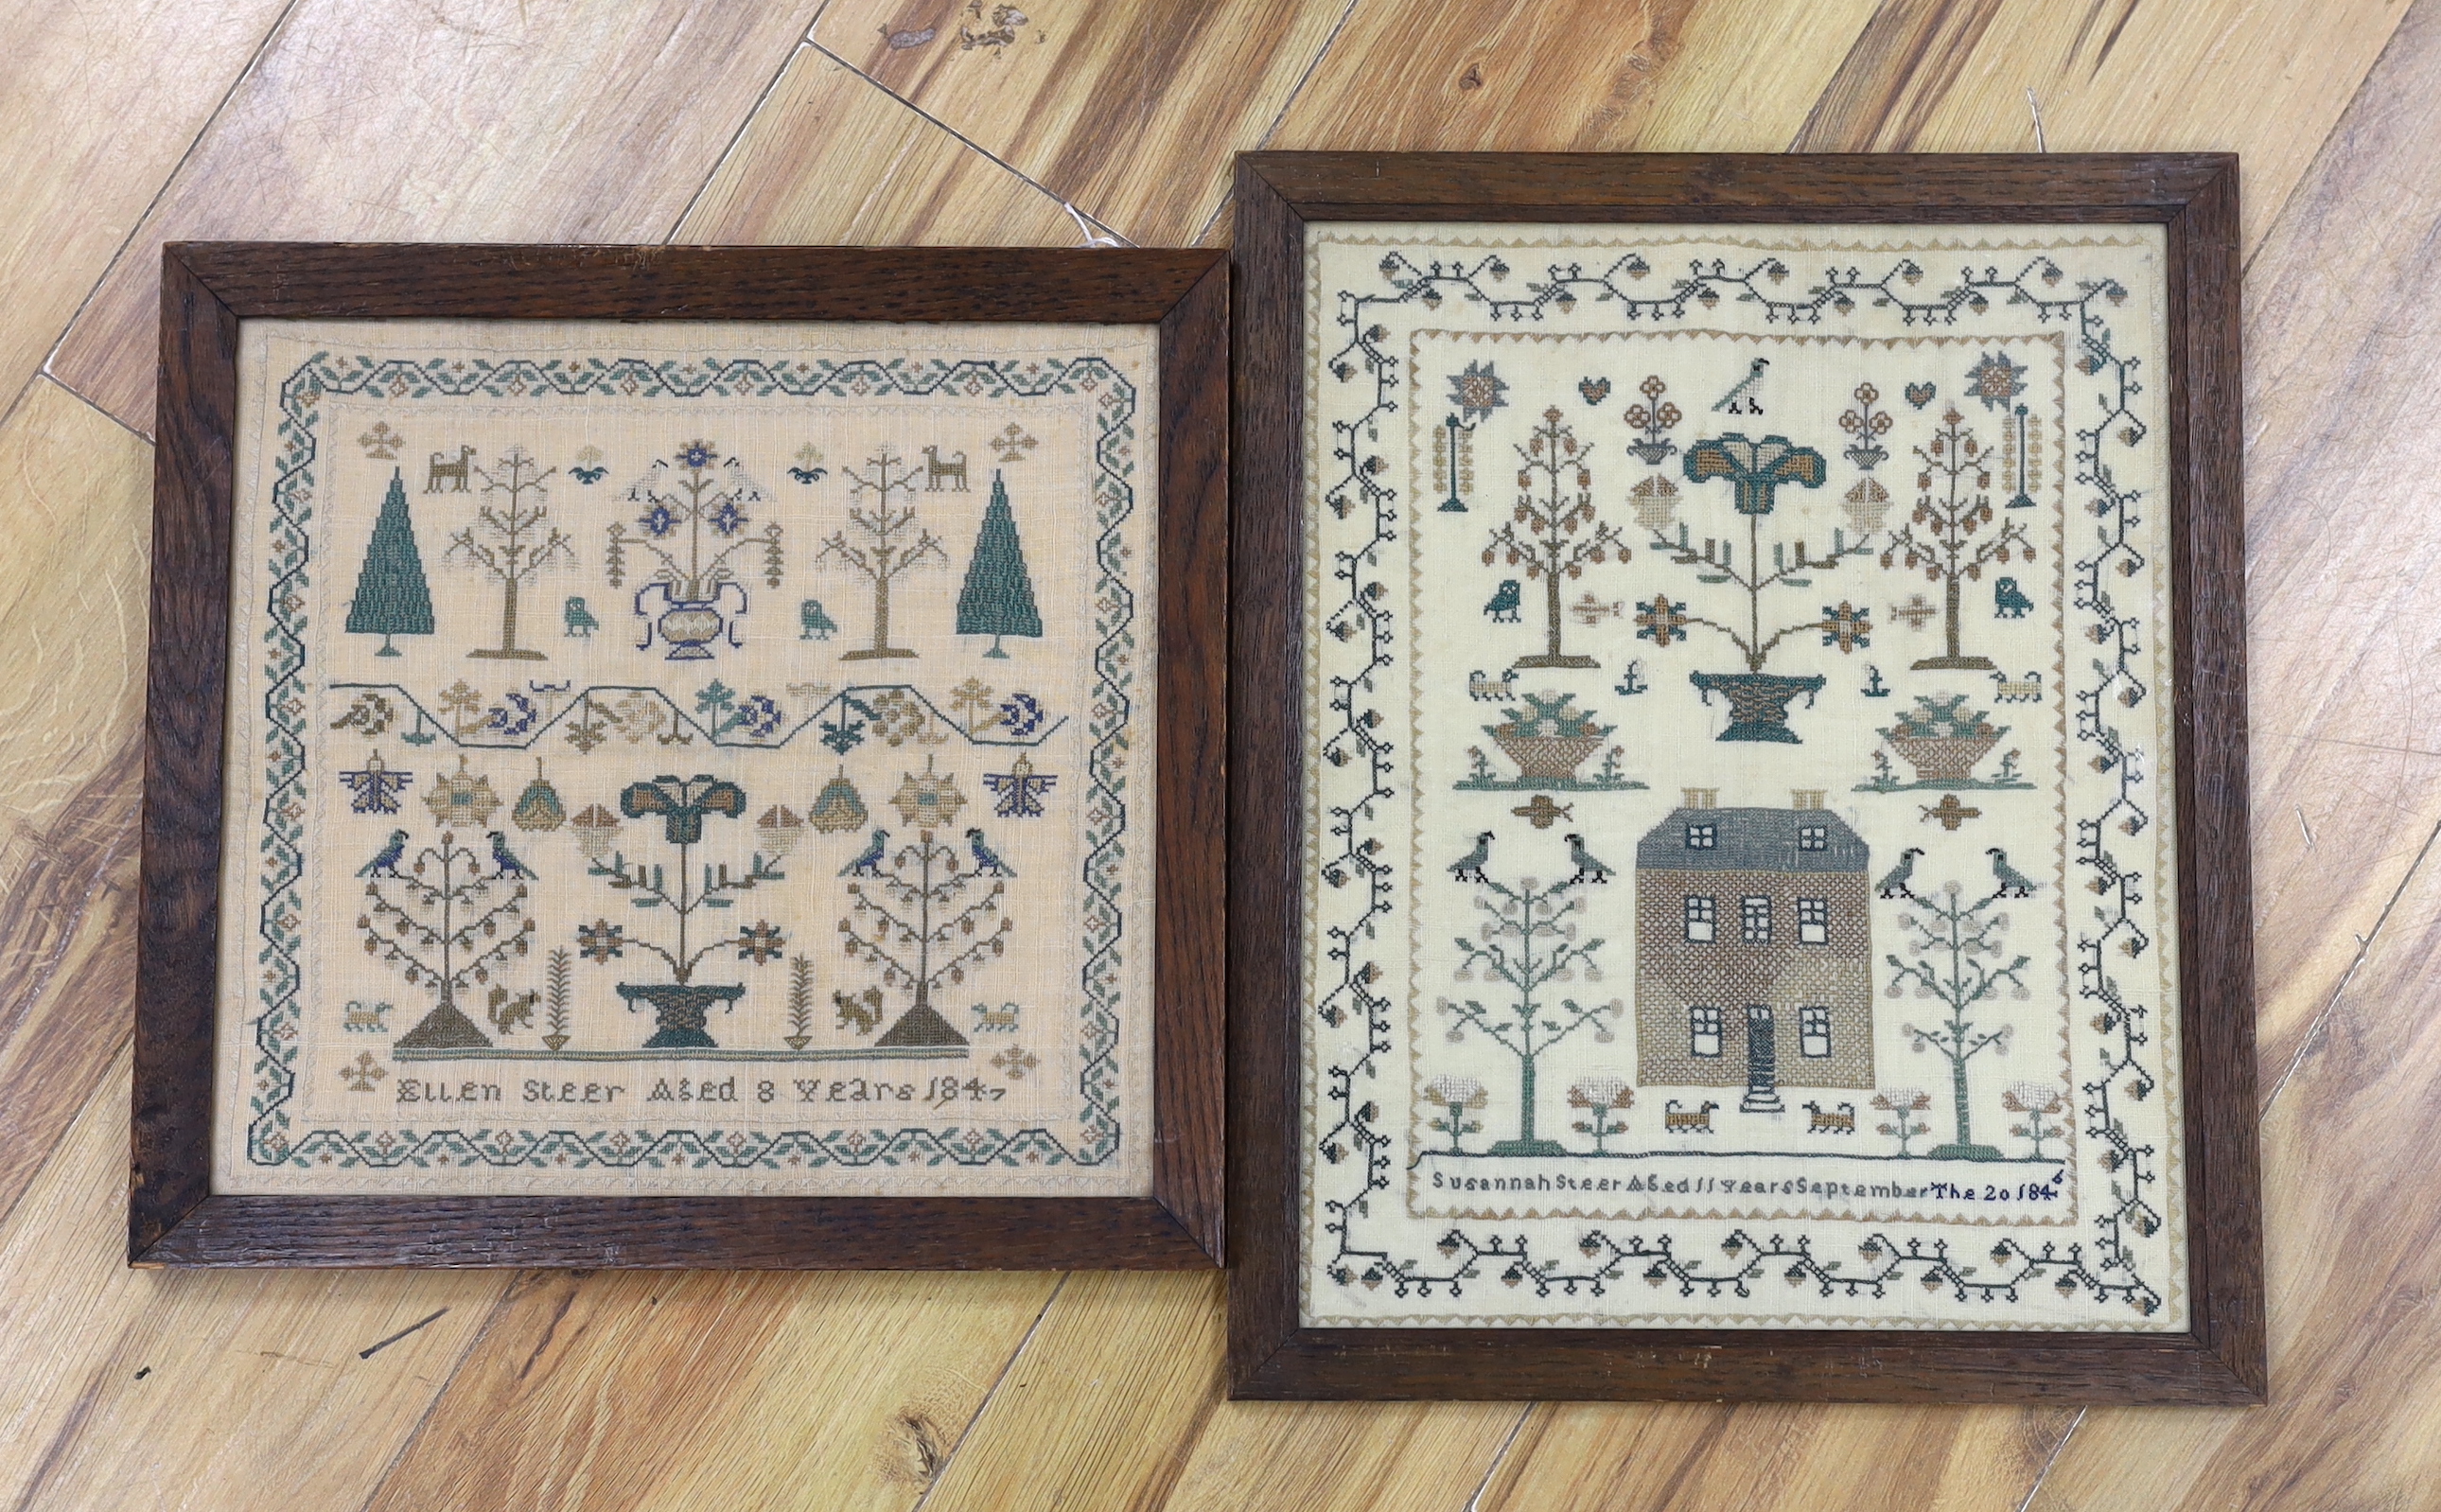 Two framed and dated samplers, one by Ellen Steer aged 8years, dated 1847, the other by Susannah Steer aged 11 years dated 1846, both worked in cross stitch motifs of trees, animals and butterflies, the larger worked als